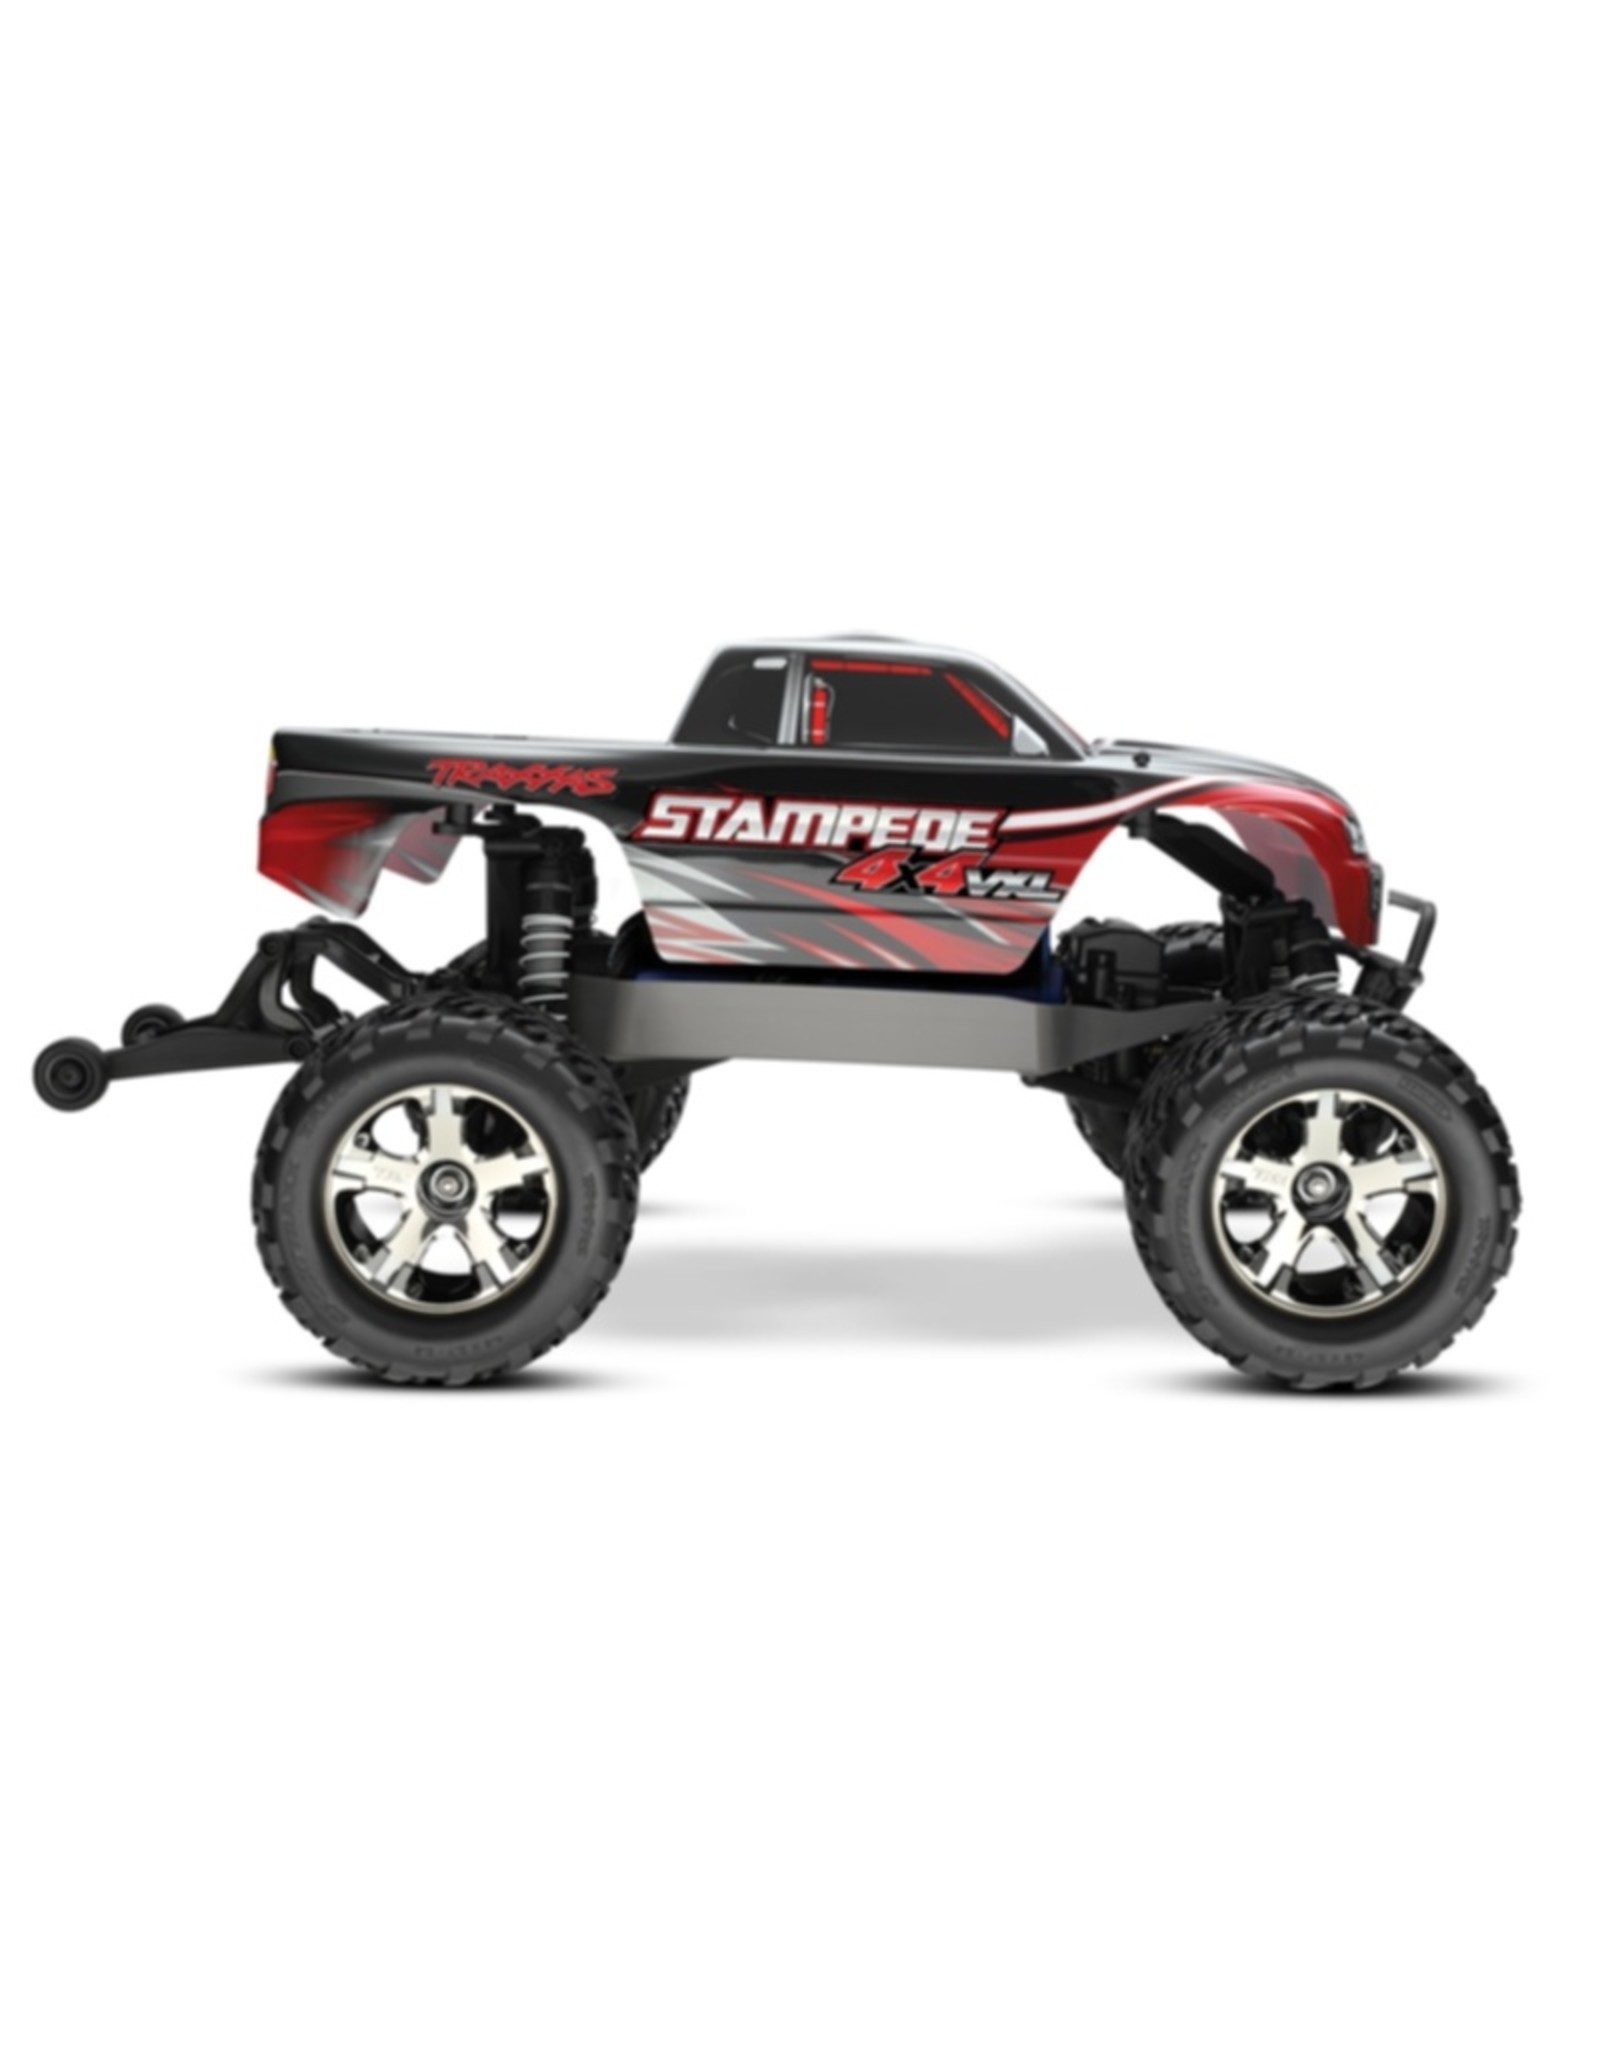 TRA TRA67086-4 Red Stampede® 4X4 VXL : 1/10 Scale Monster Truck. Ready-to-Race® with TQi Traxxas Link™ Velineon® VXL-3s brushless ESC (fwd/rev), and Traxxas Stability Management (TSM)